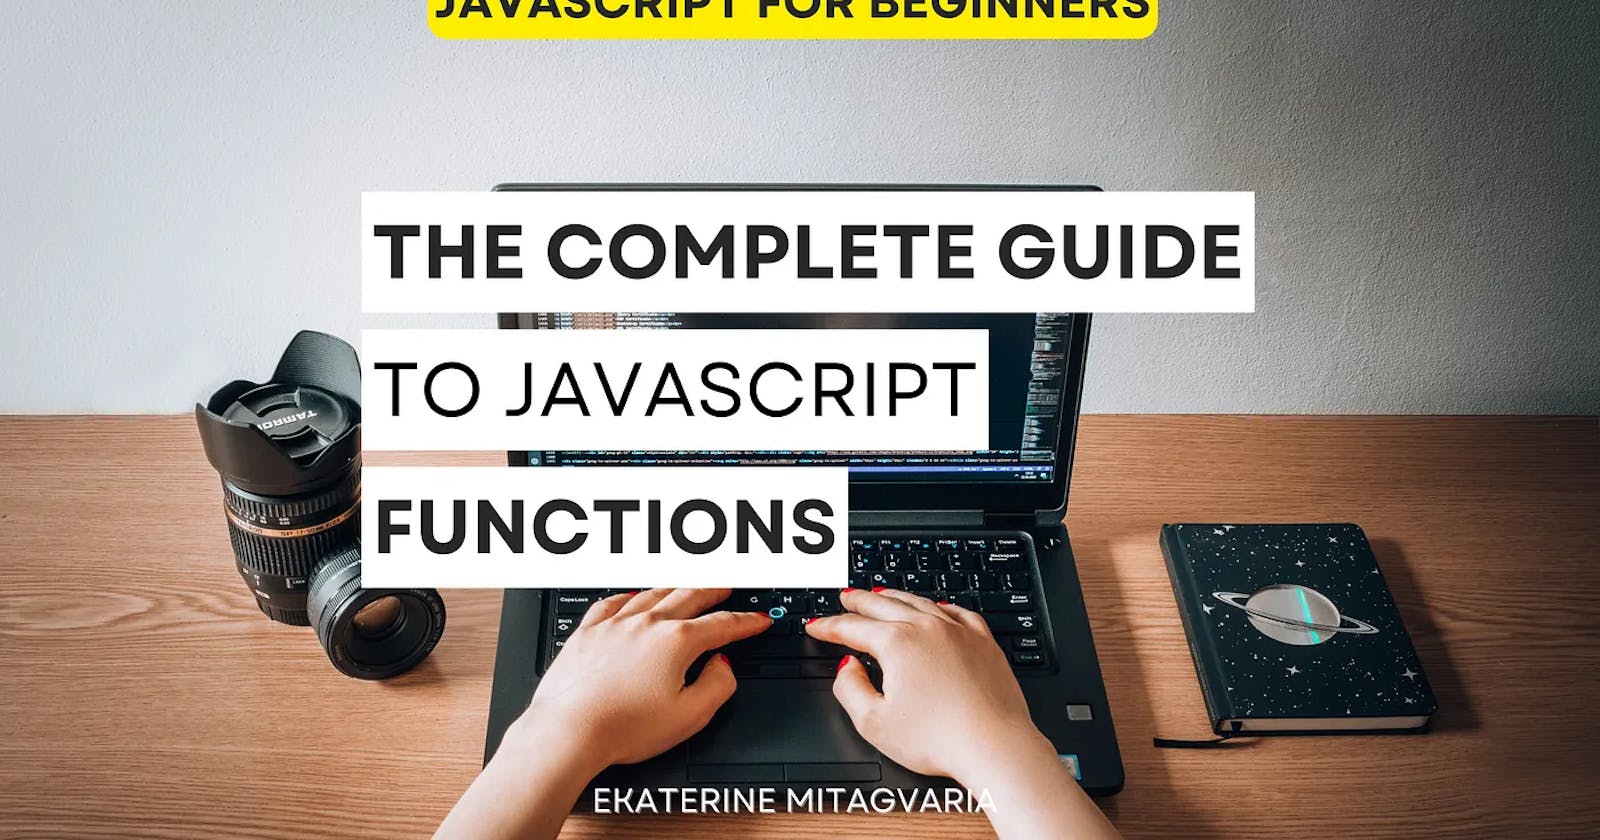 The Complete Guide To JavaScript Functions